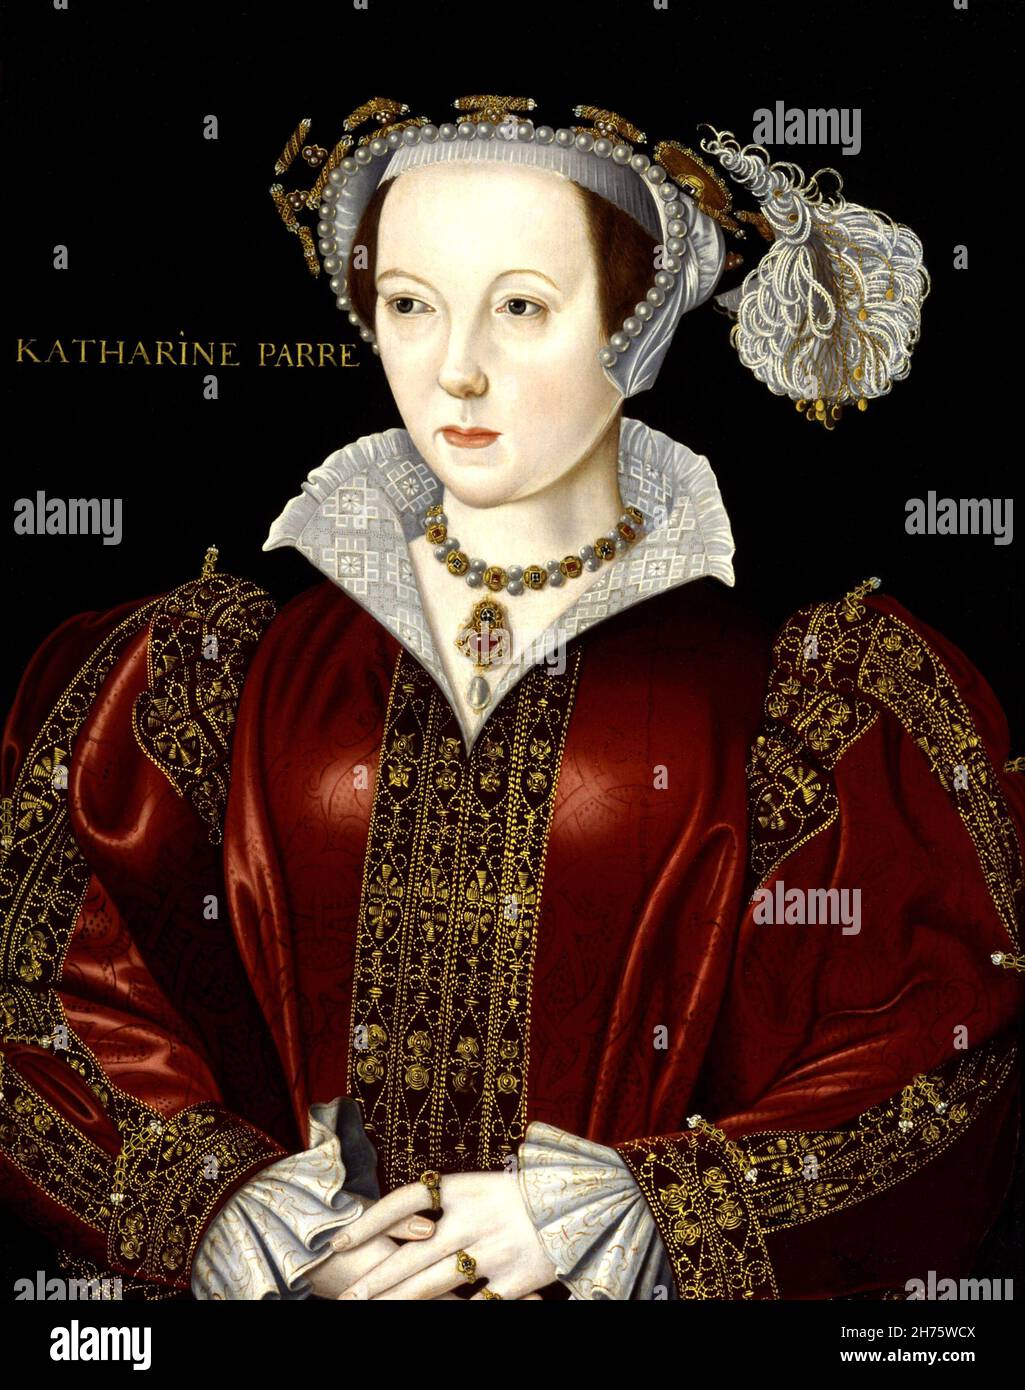 Catherine Parr - Queen Consort of England and Ireland by unknown artist Stock Photo